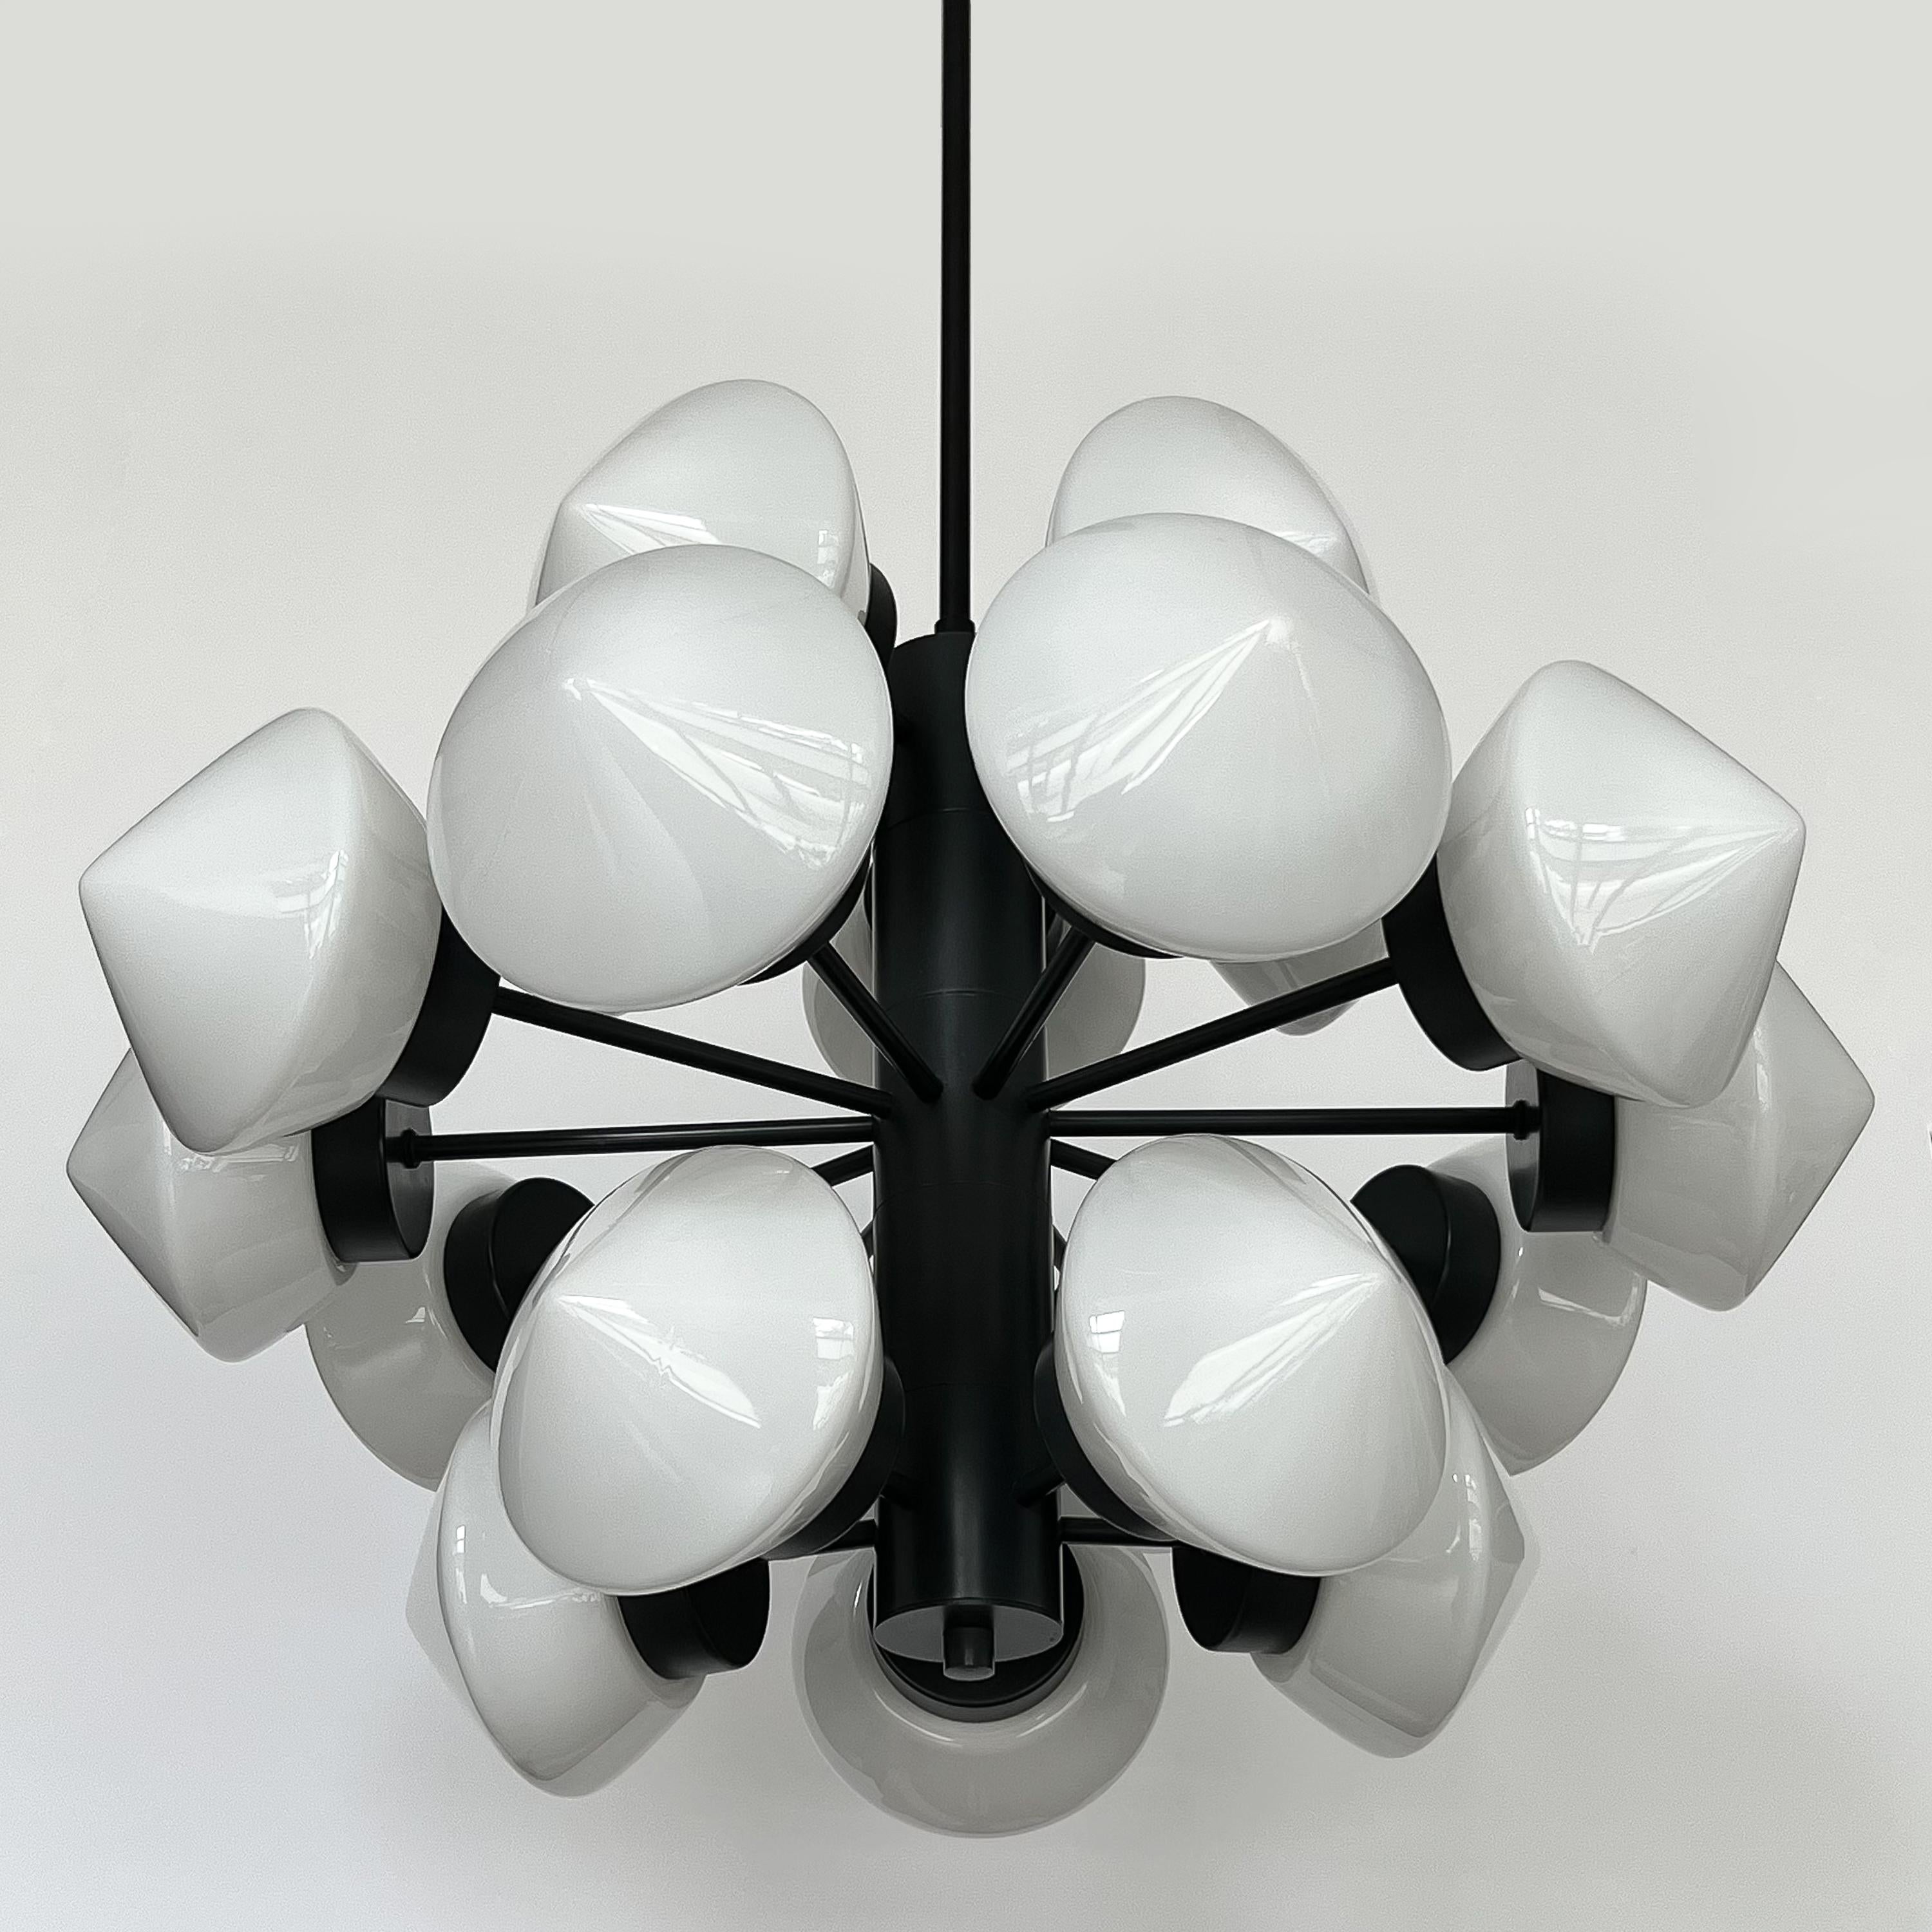 Mid-20th Century Swedish 20 Globe Chandelier by Fagerhults Belysning For Sale